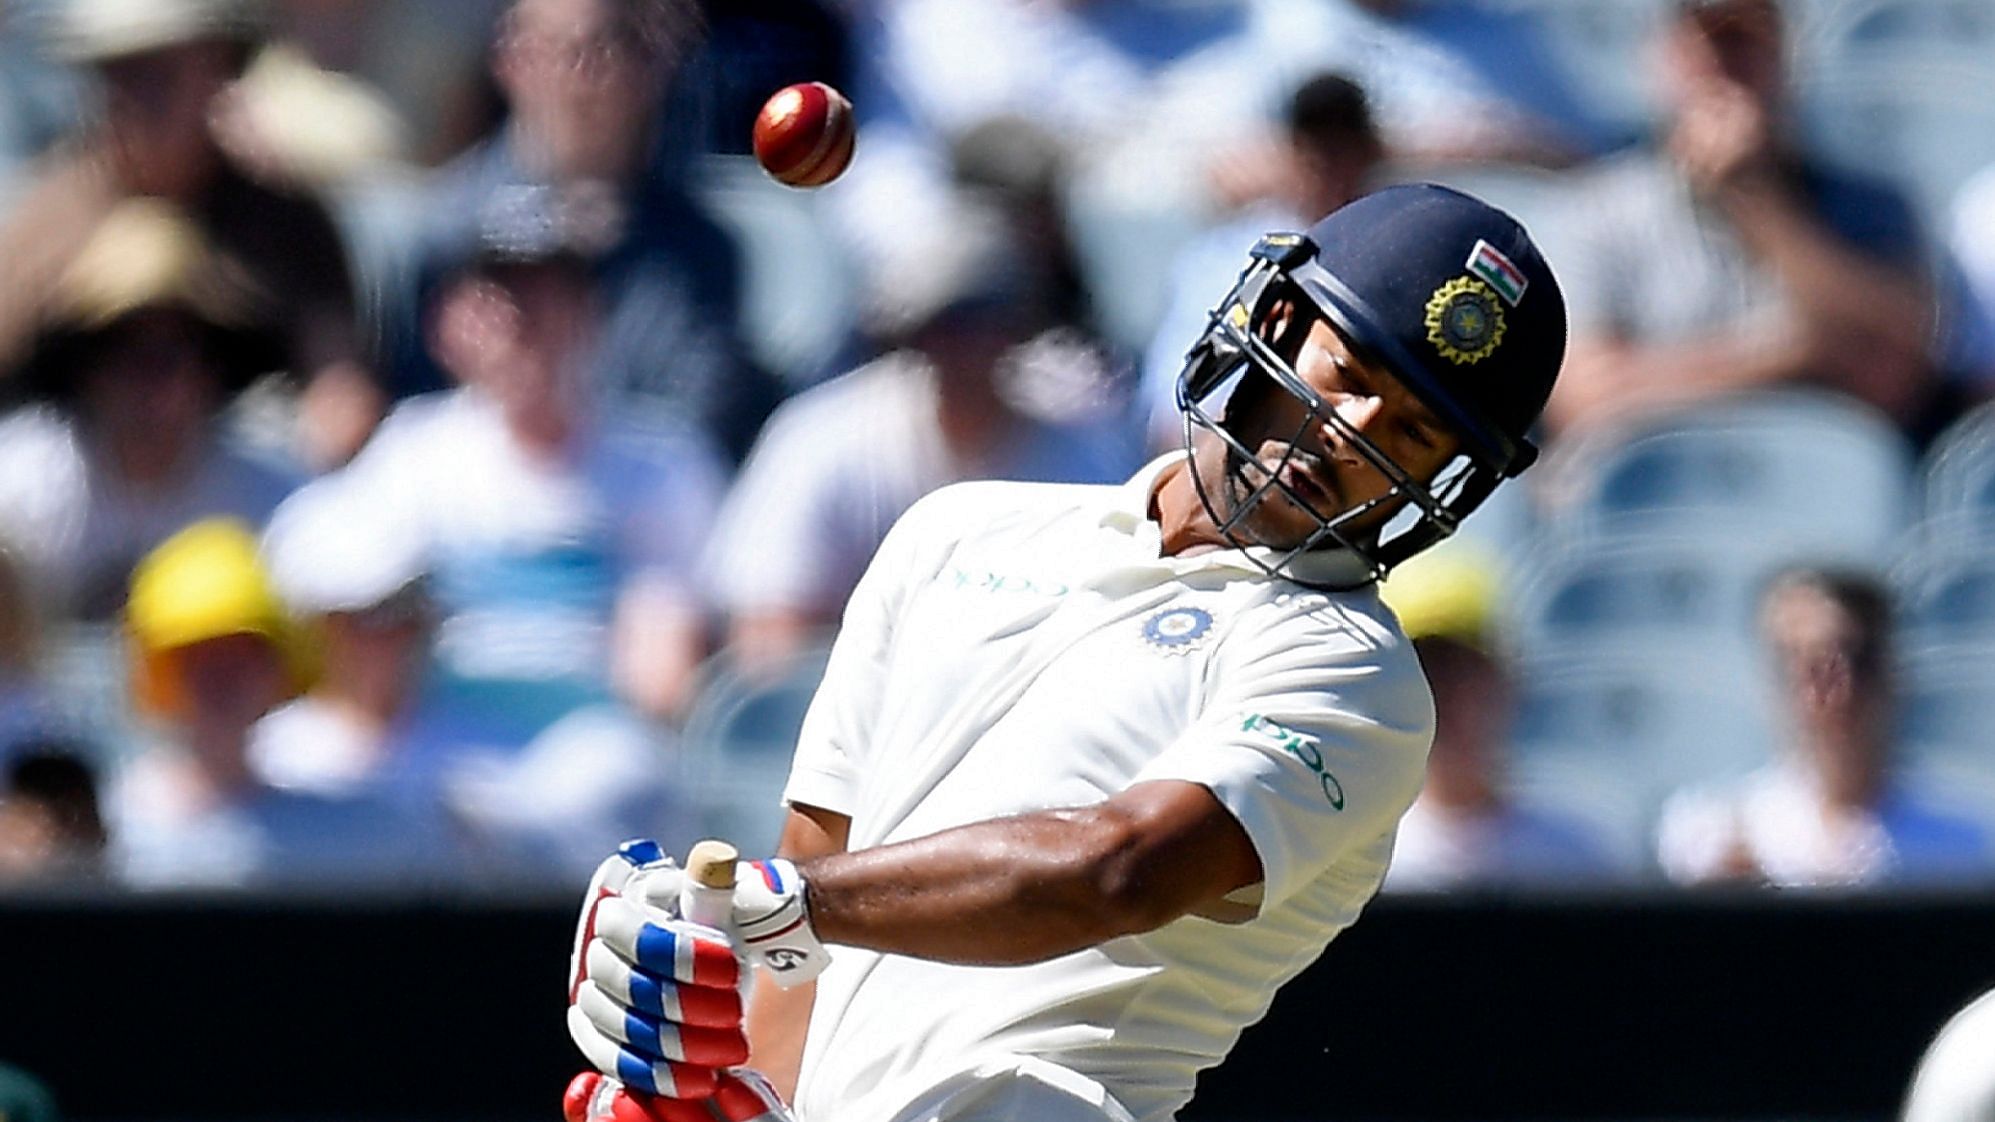 Mayank Agarwal scored a well-made 76 on debut against Australia in Melbourne on Wednesday, 26 December.